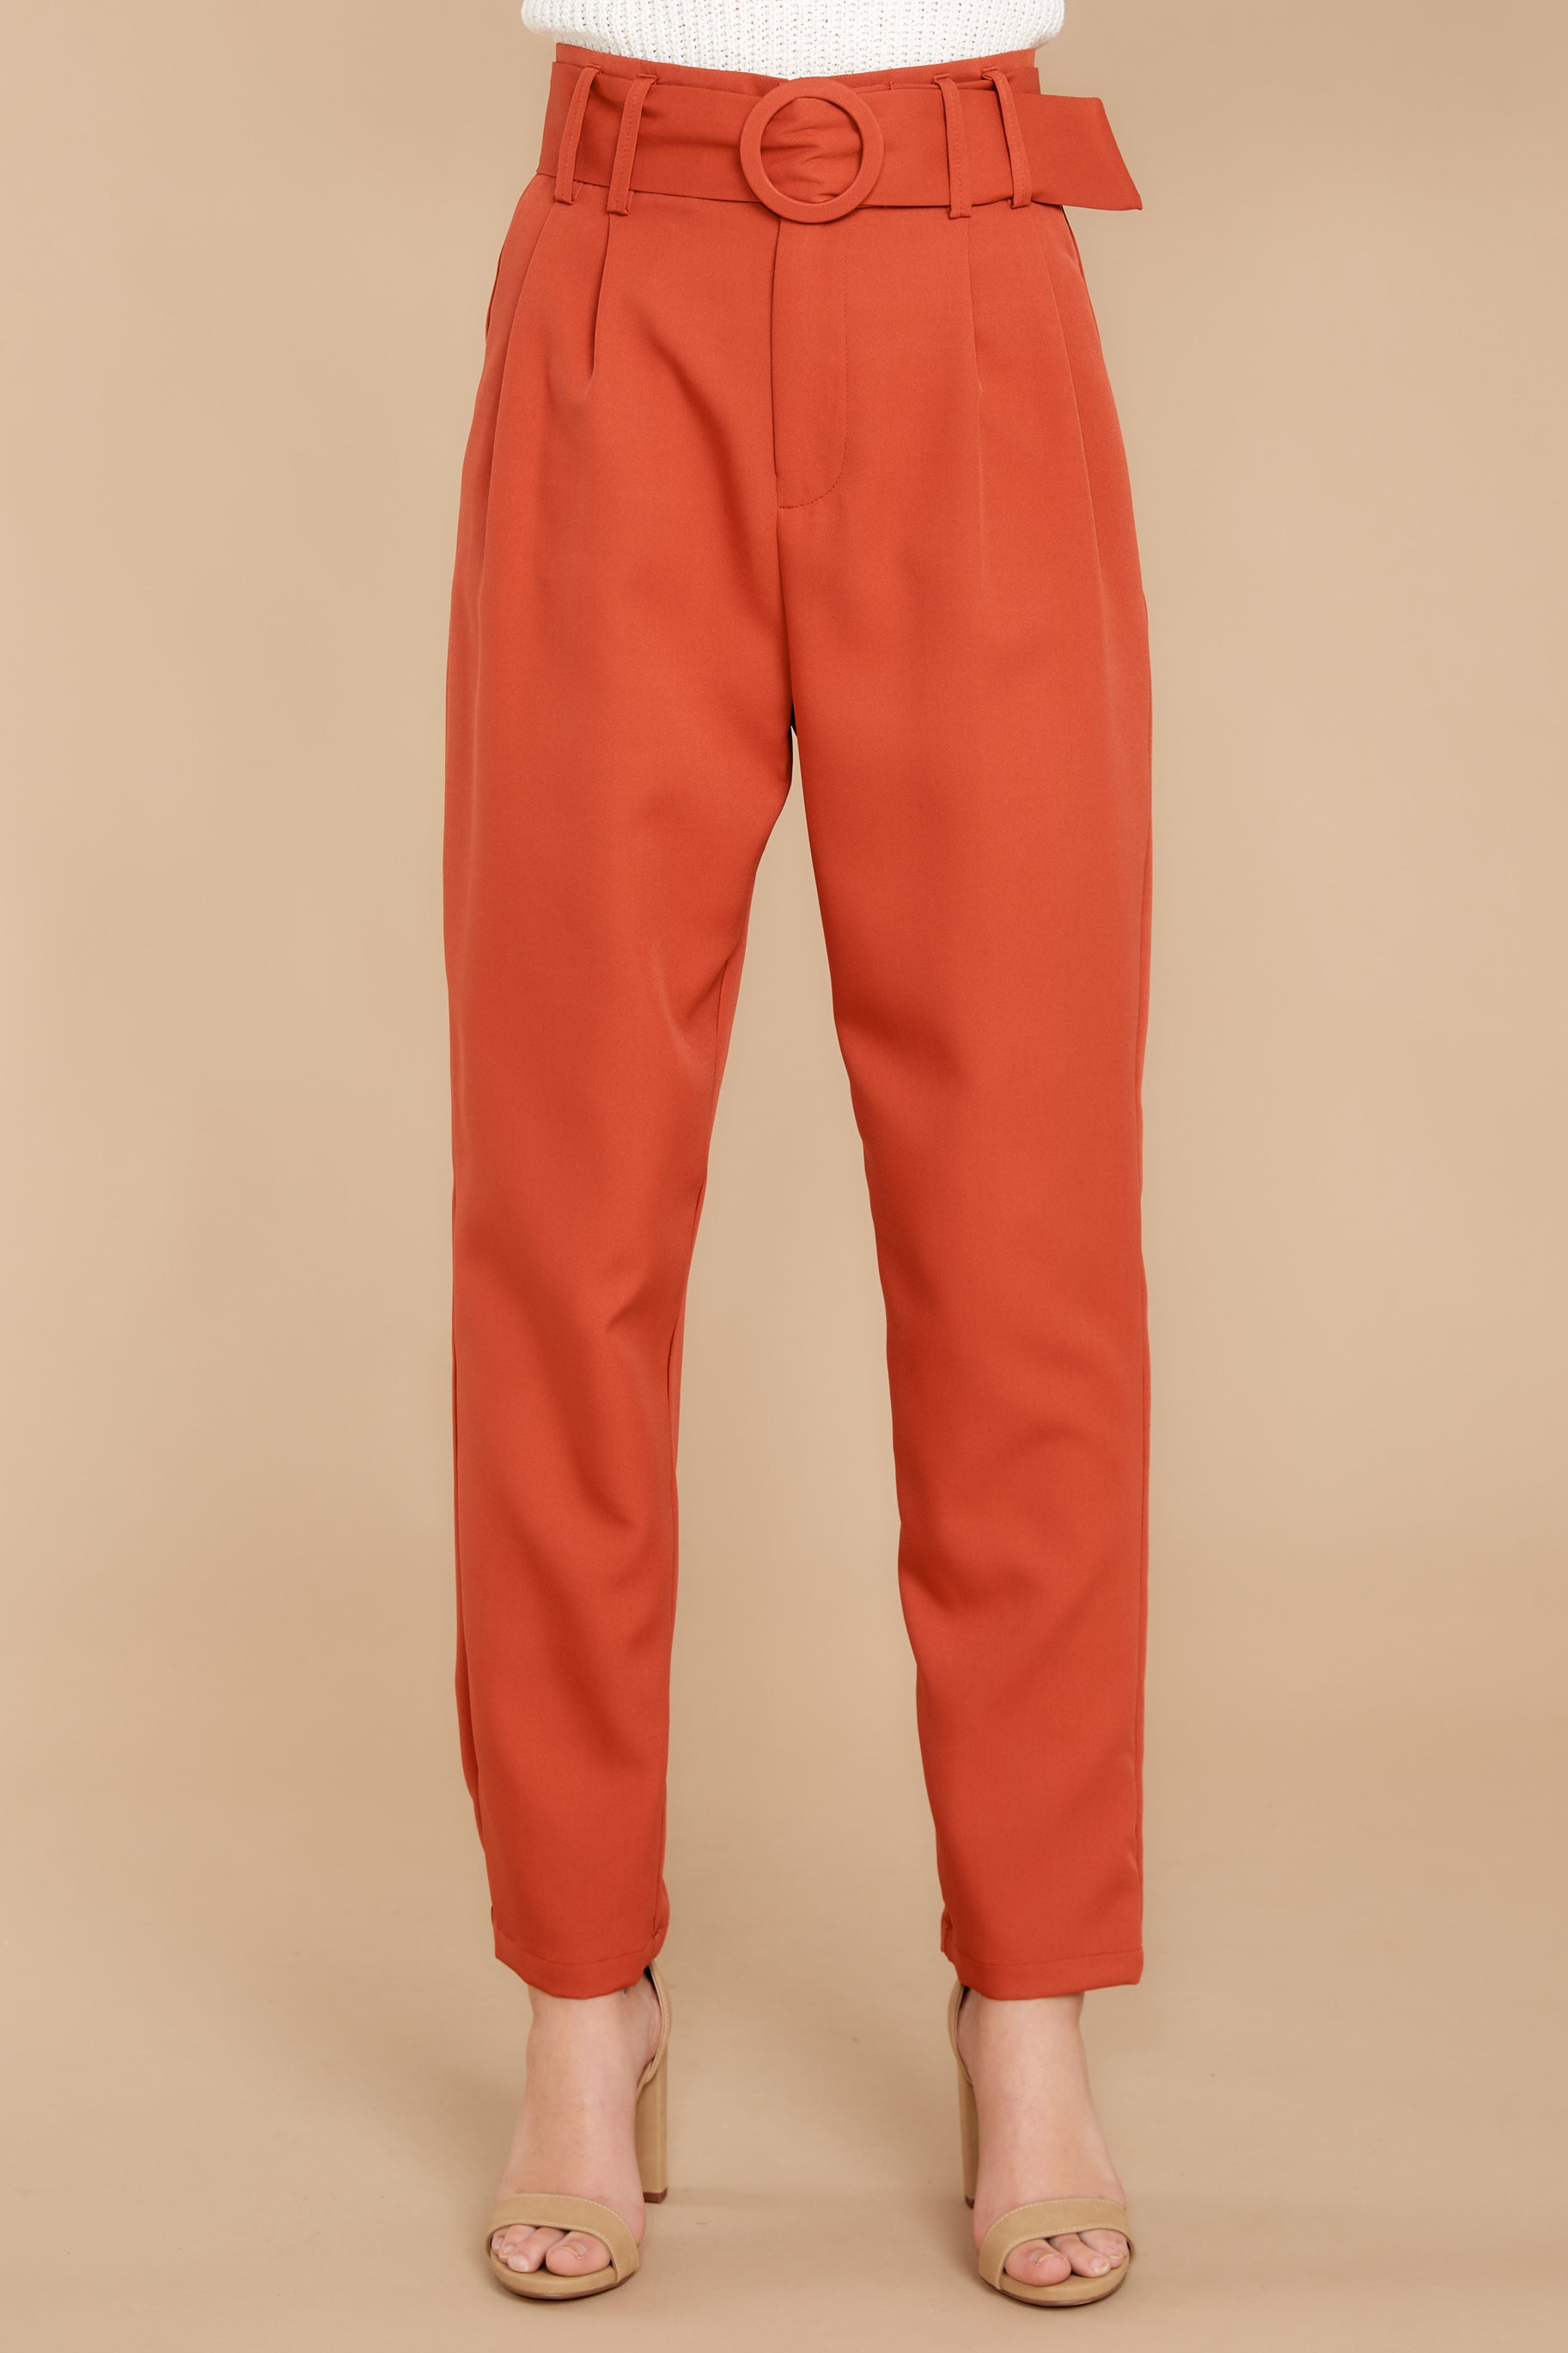 2 Into The Office Coral Orange Pants at reddress.com